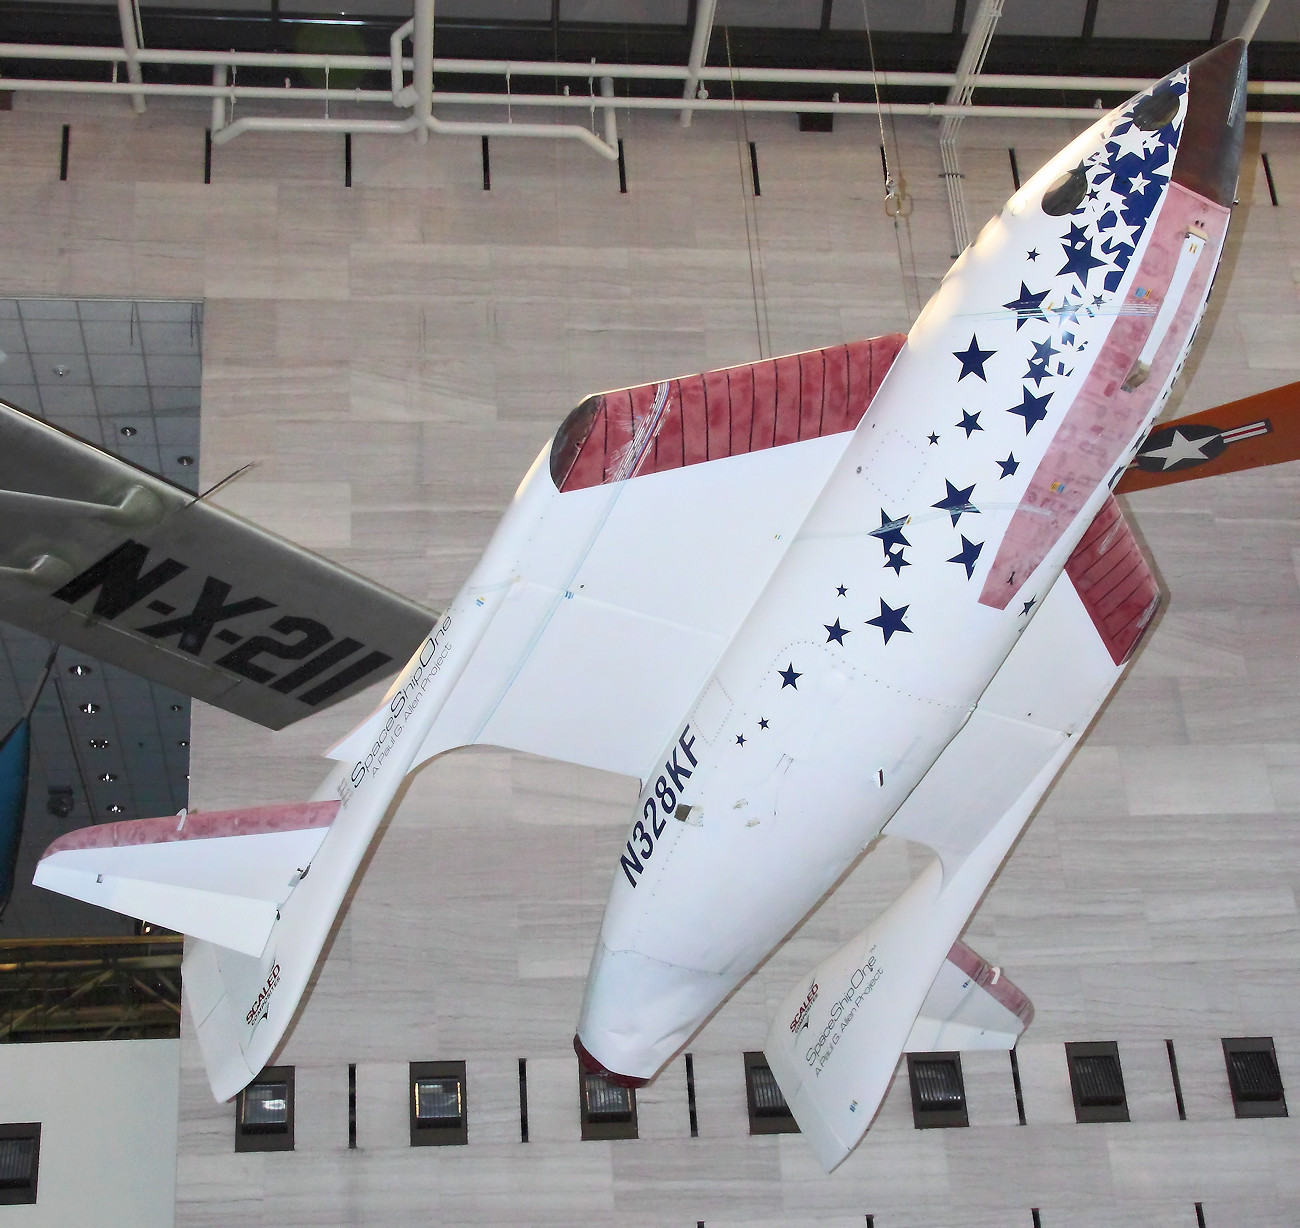 Space Ship One - Scaled Composites